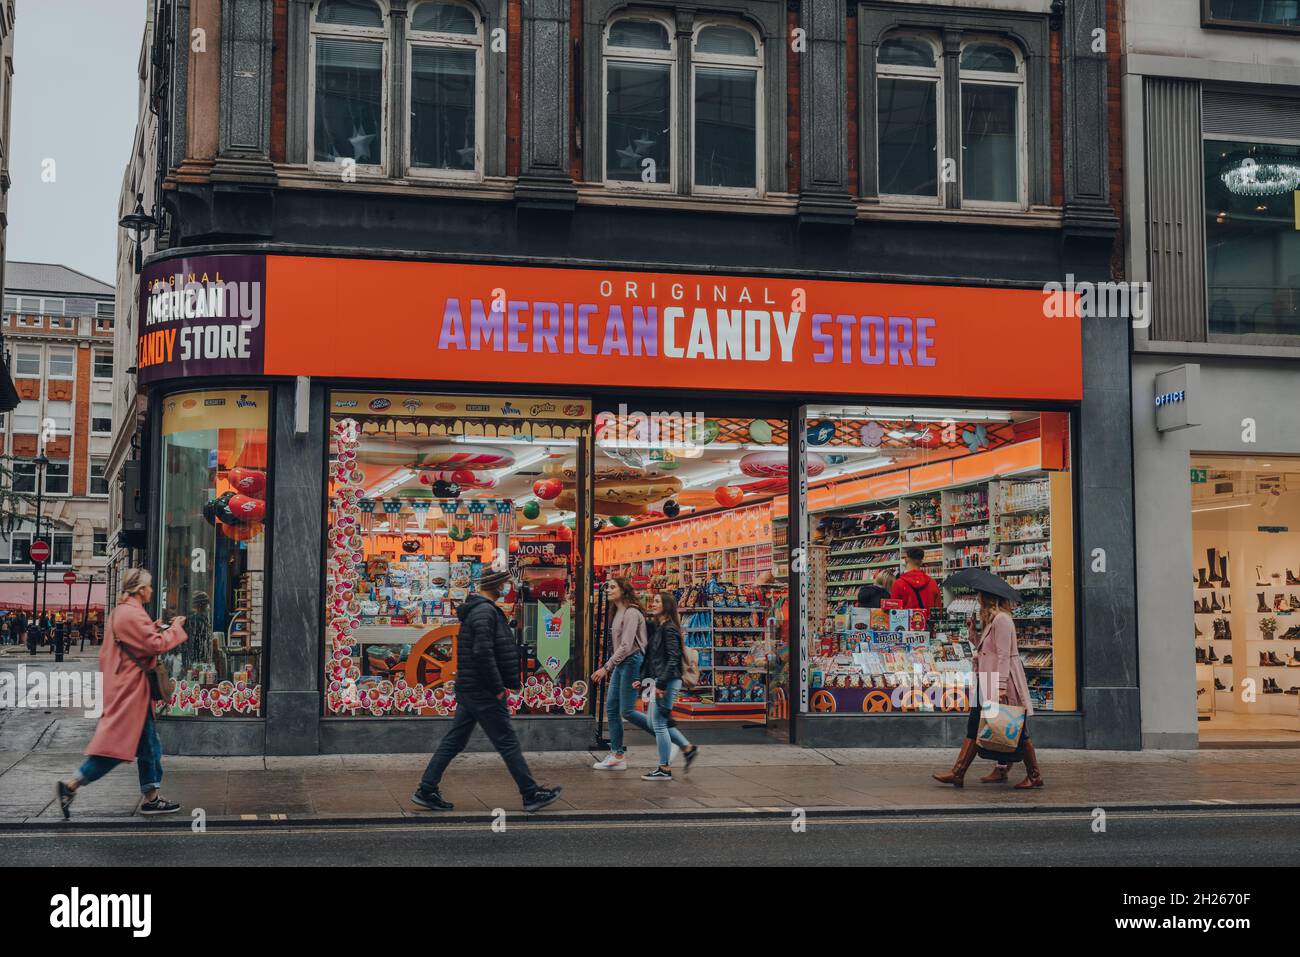 London, UK - October 02, 2021: American Candy Store, one of the largest retailers of American sweets, drinks, chocolates, sodas and groceries in UK, o Stock Photo